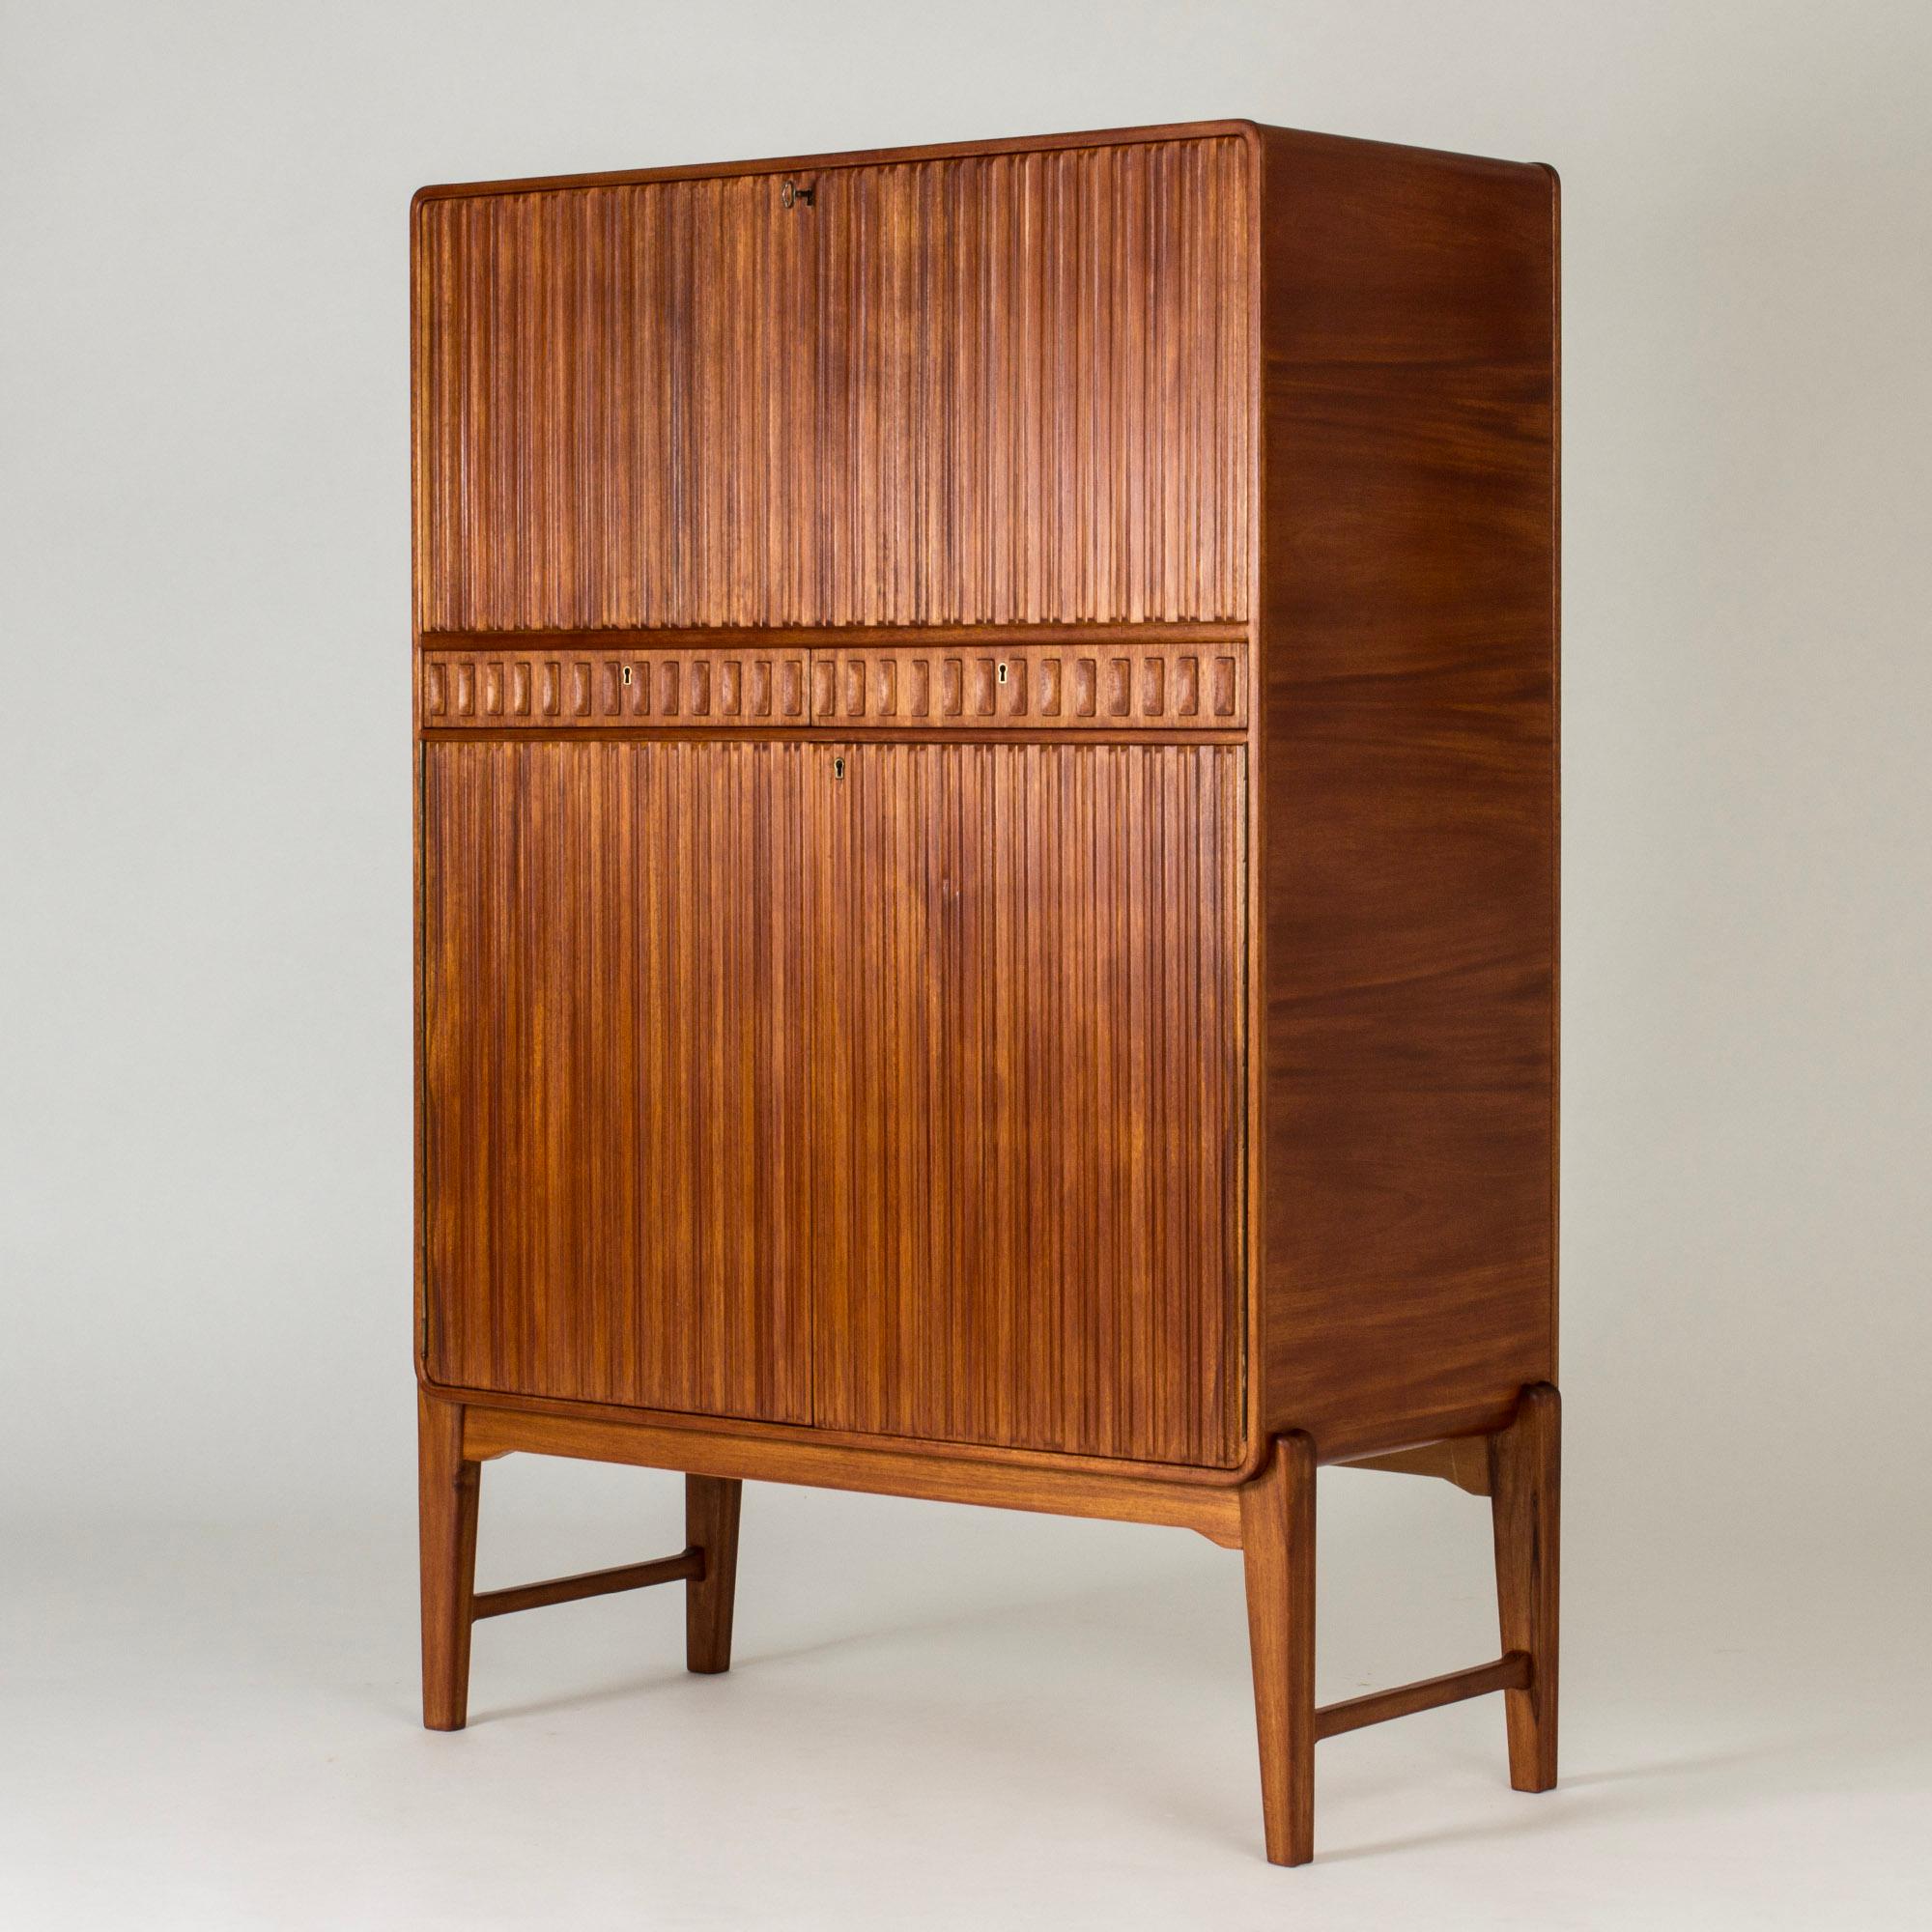 Striking unique mahogany cabinet by Swedish architect Carl Cederholm, in a luxurious design. Elegant relief pattern of stripes on the fronts and drawers, subtle sculpted details. Dry bar top part with a glass shelf.